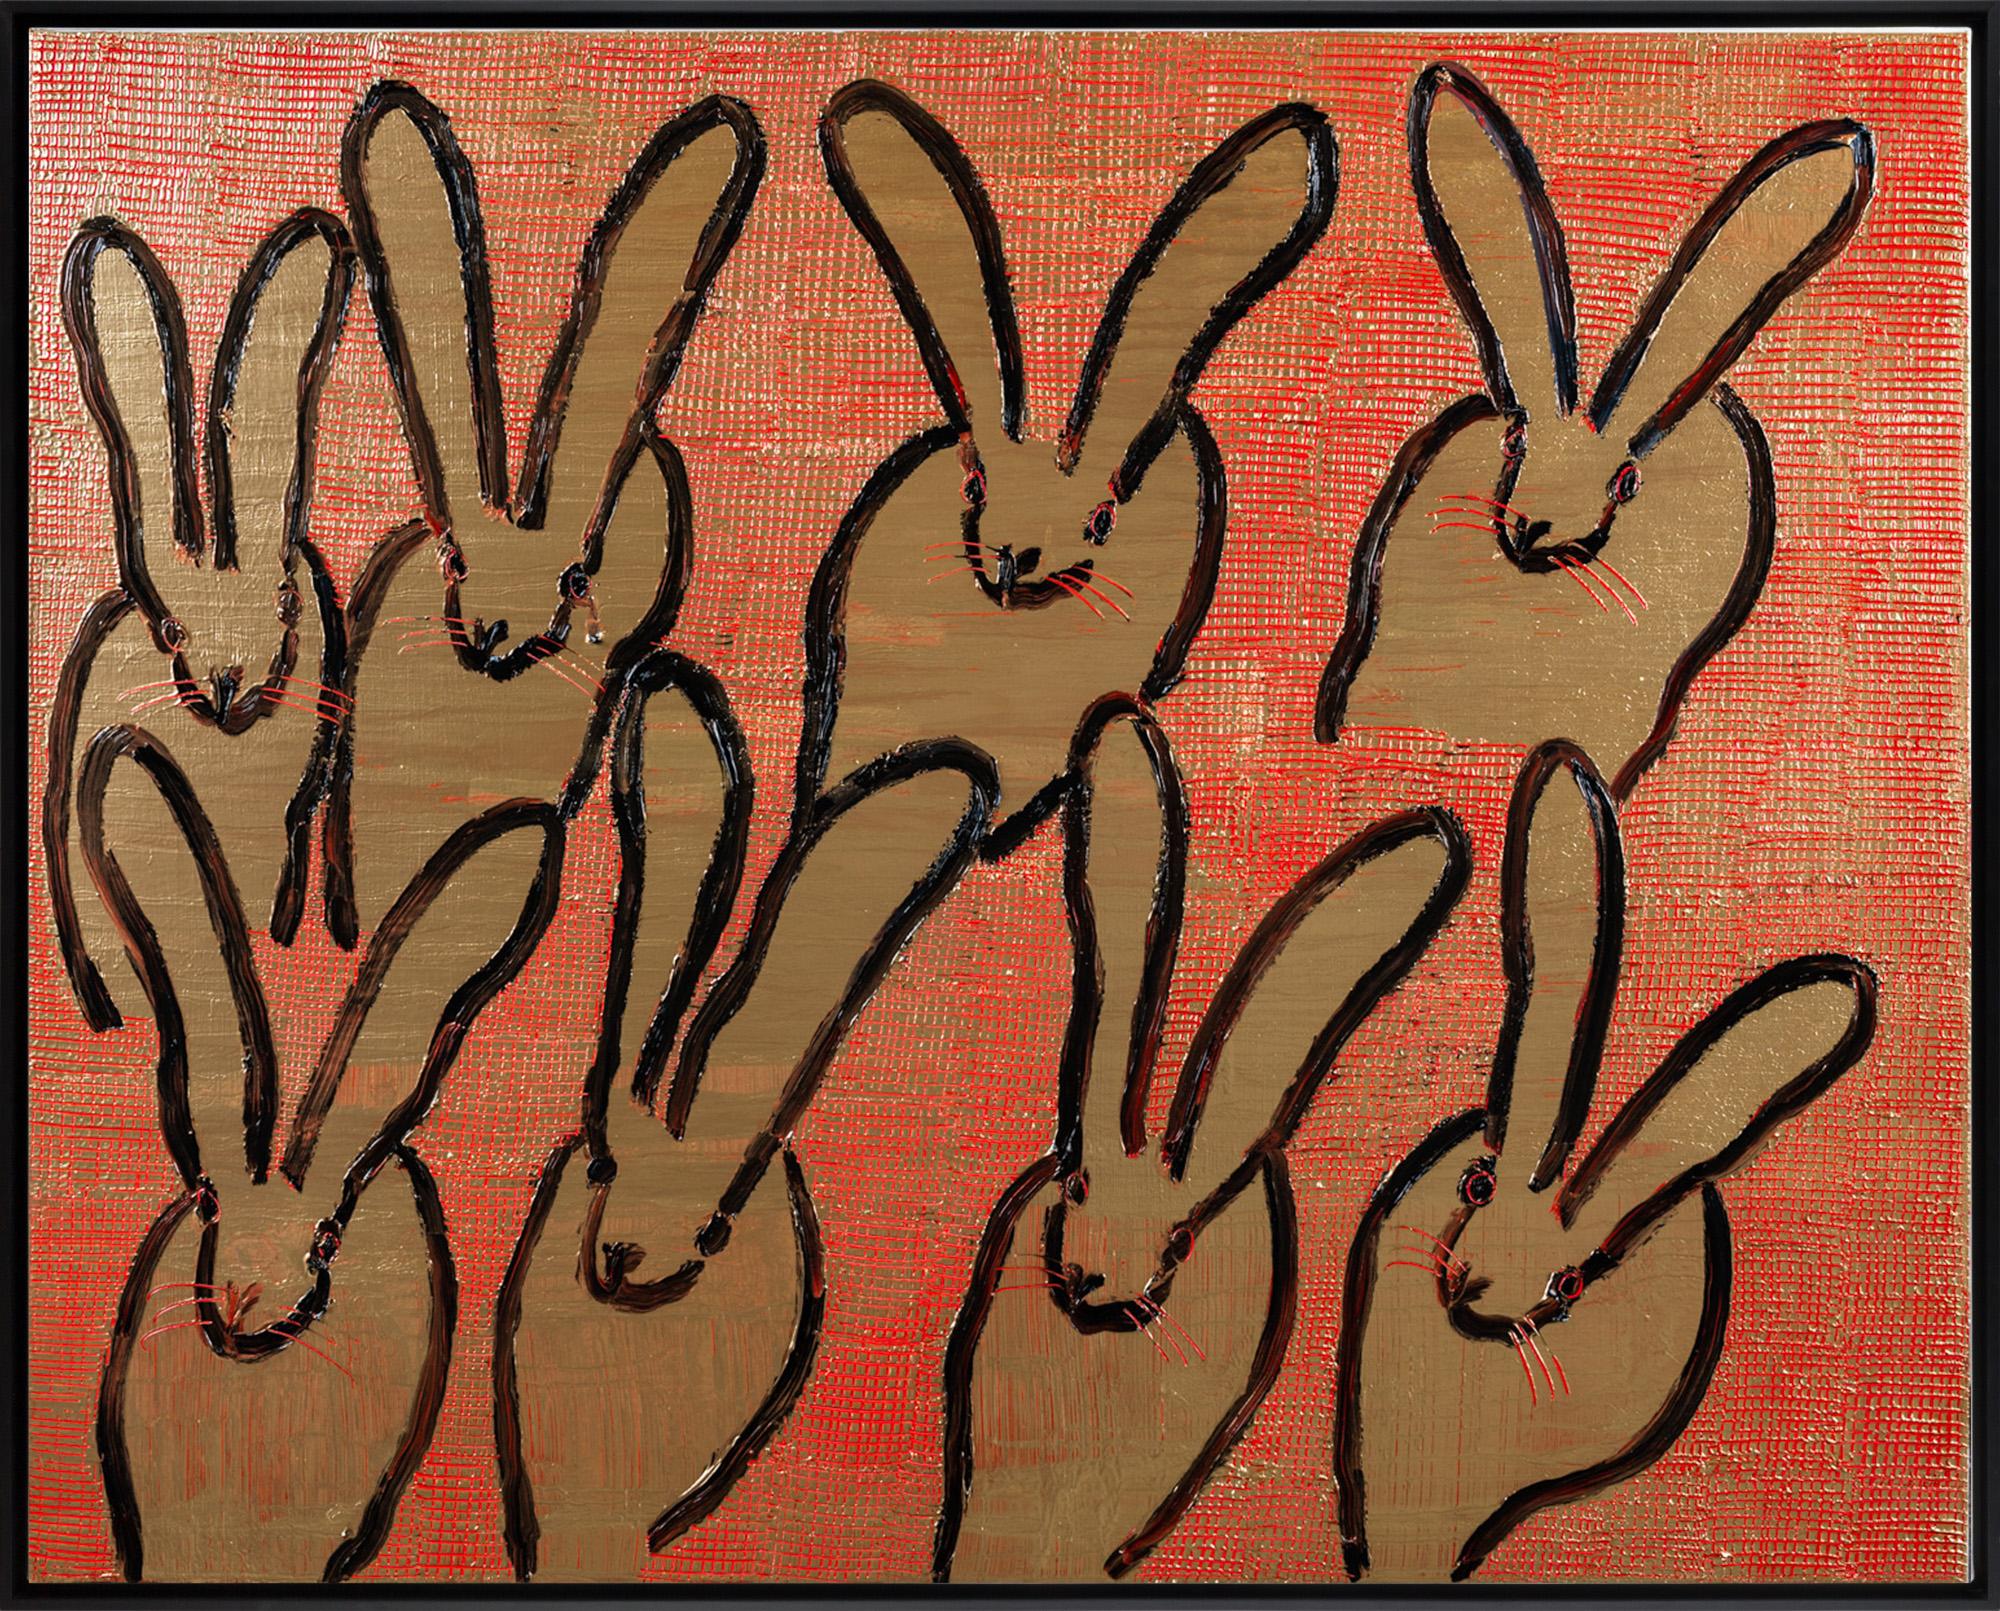 "Scored Hutch" is a framed oil painting on canvas by Hunt Slonem, depicting a hutch of rabbits set against a metallic gold and vibrant red background. The artist's technique of scoring thousands of individual lines into the thick paint adds organic